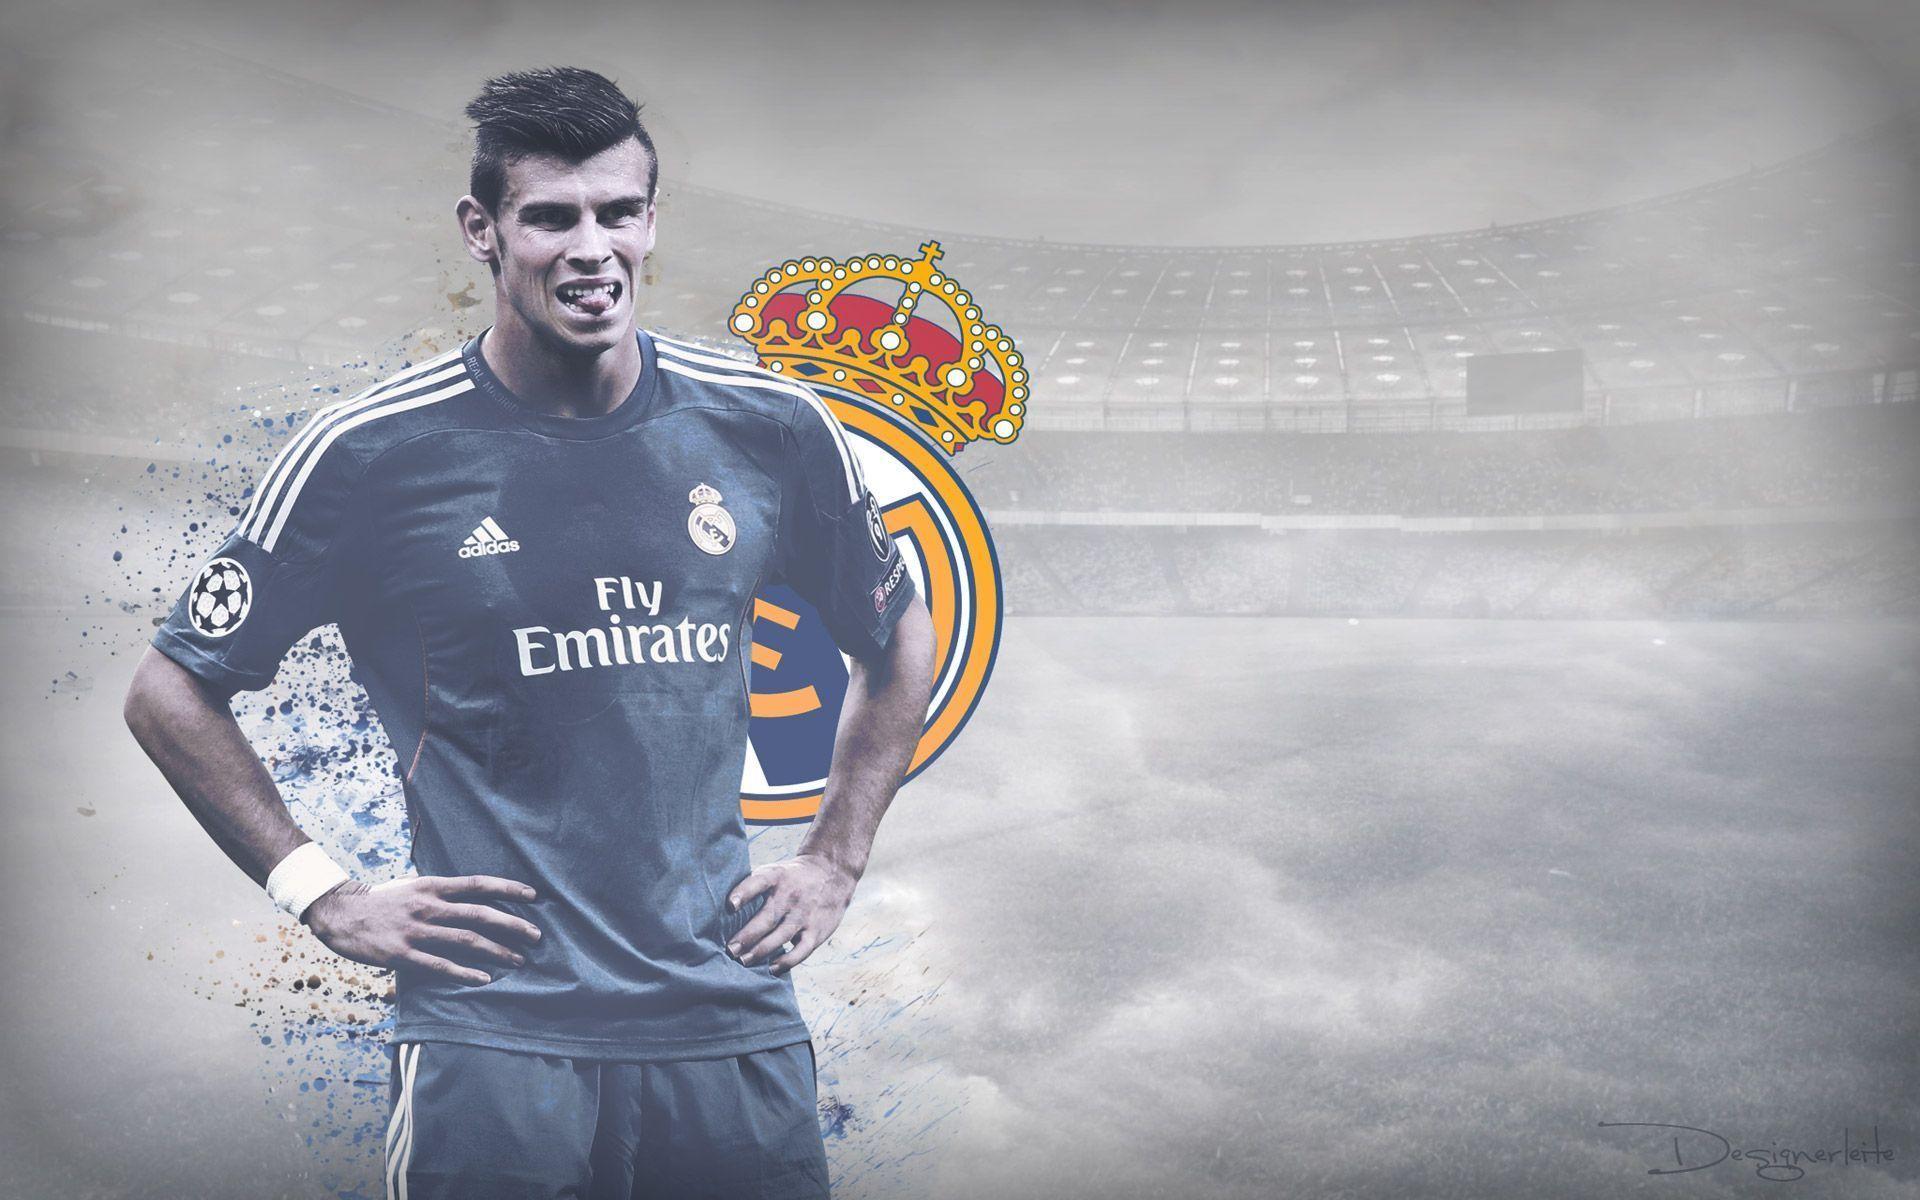 Gareth Bale Wallpaper High Resolution and Quality Download. HD